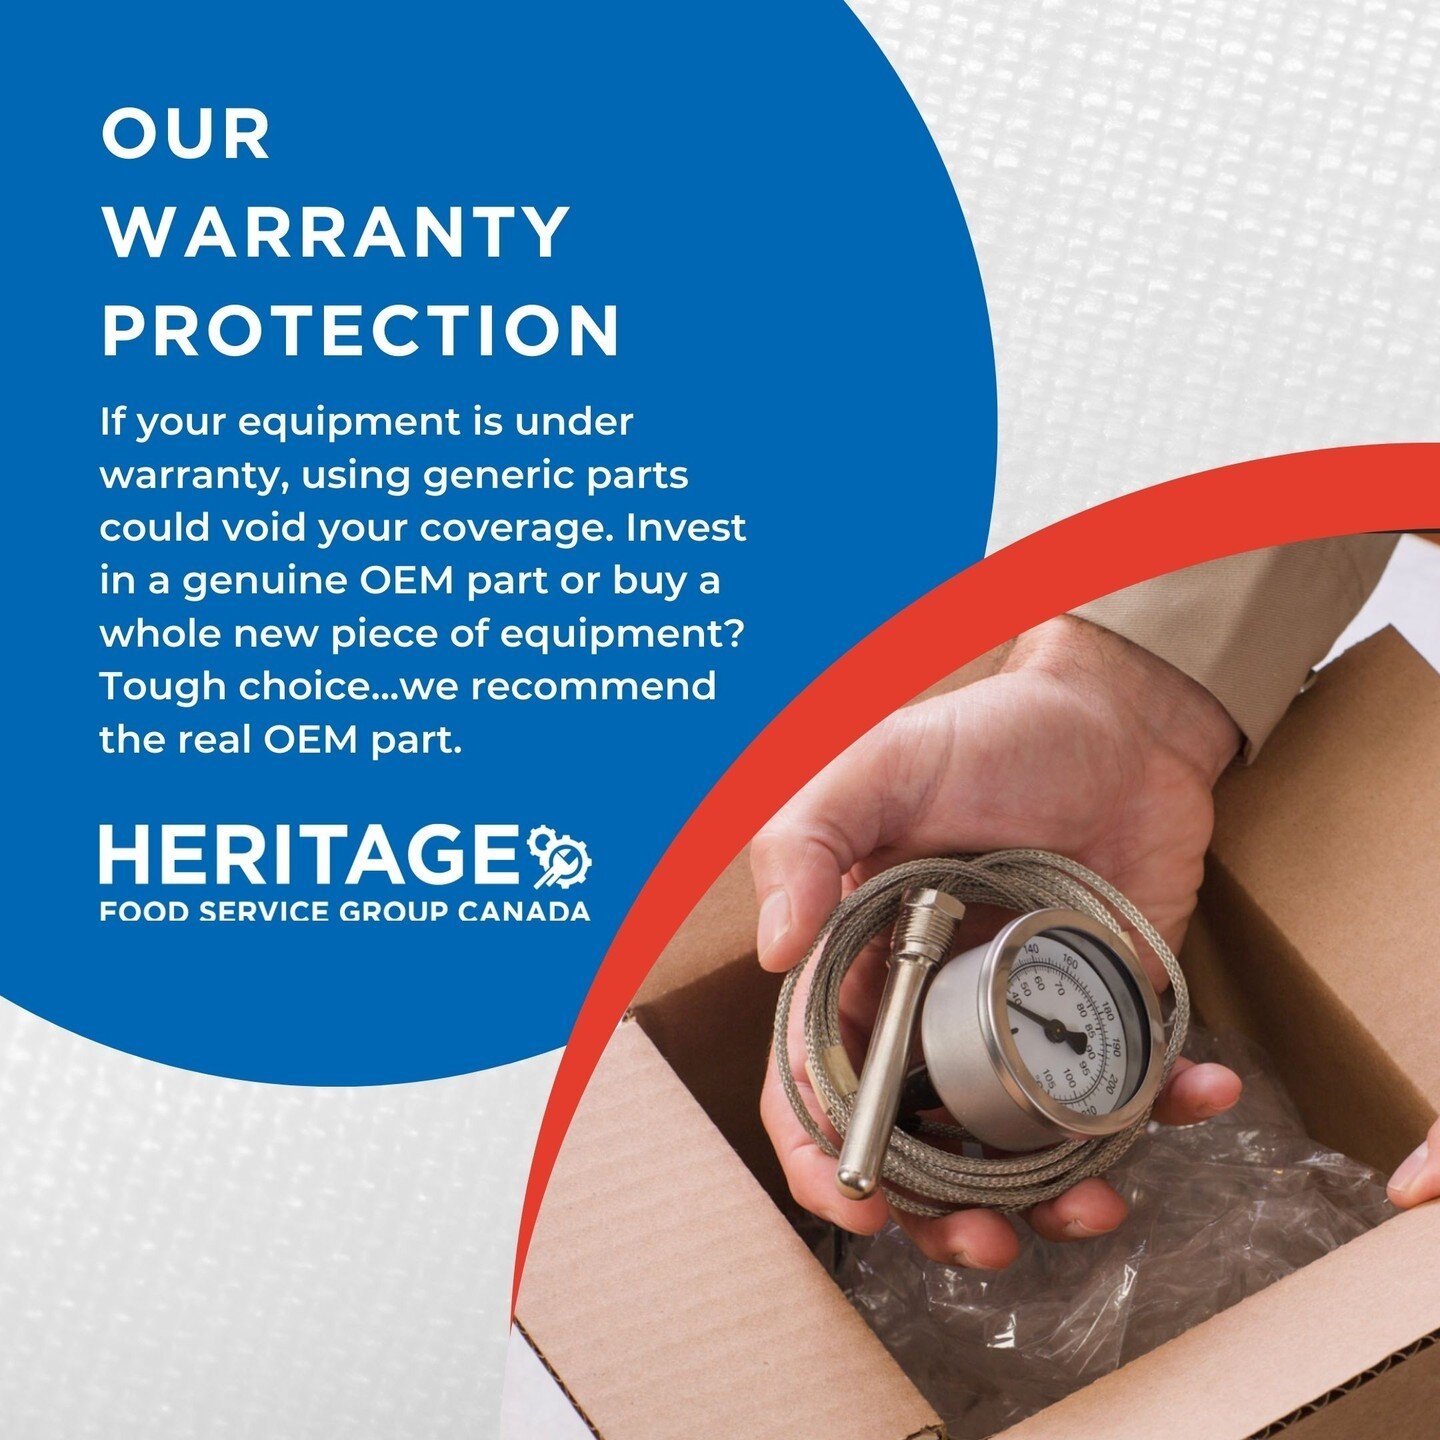 Our Warranty Protection ⁠
⁠
If your equipment is under warranty, using generic parts could void your coverage. Invest in a genuine OEM part or buy a whole new piece of equipment? Tough choice...we recommend the real OEM part.⁠
⁠
For great parts, amaz